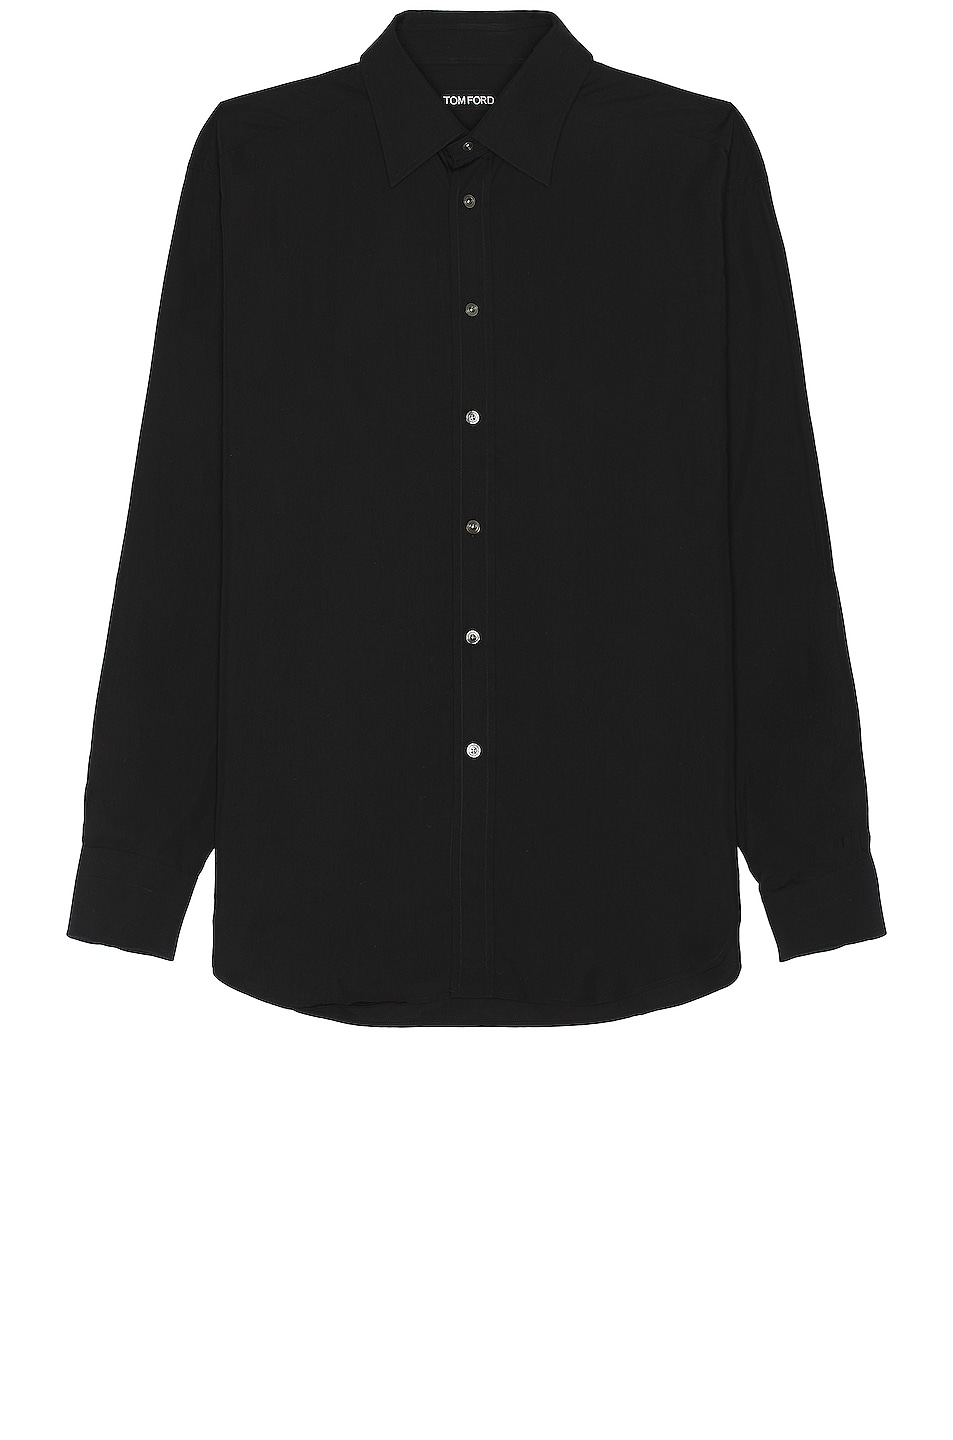 Image 1 of TOM FORD Fluid Silk Parachute Fluid Fit Shirt in Black